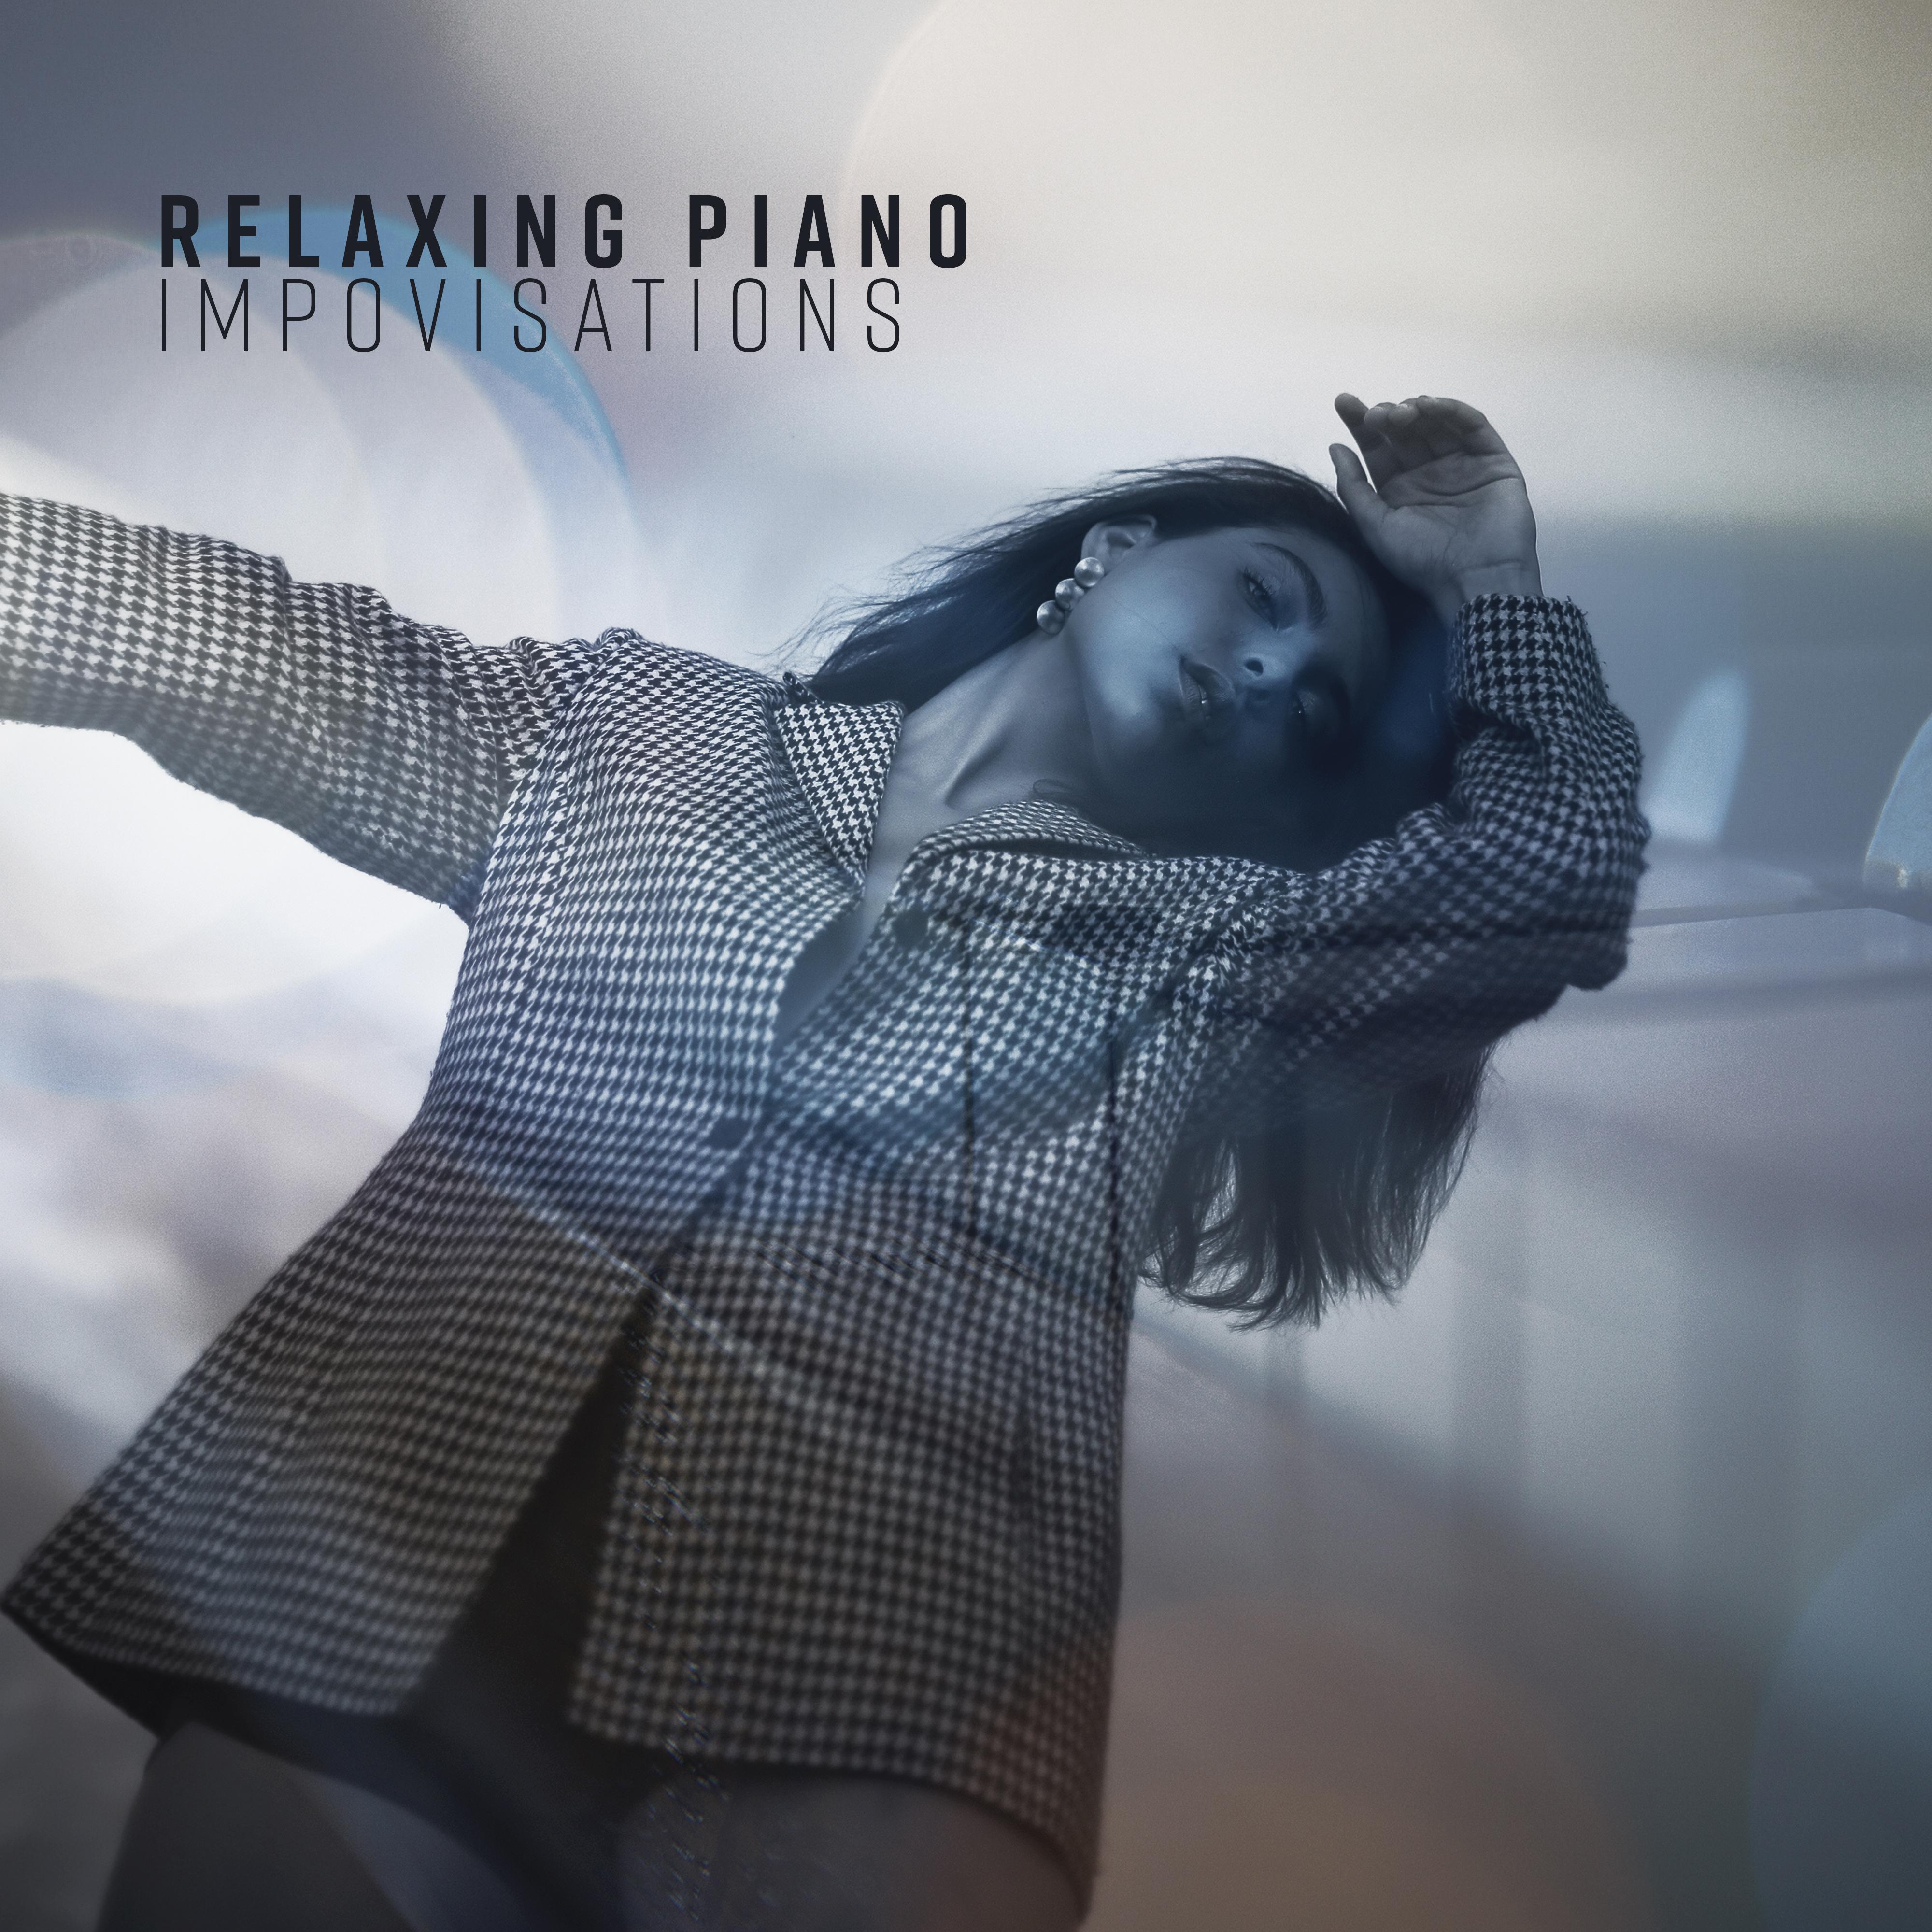 Relaxing Piano Impovisations